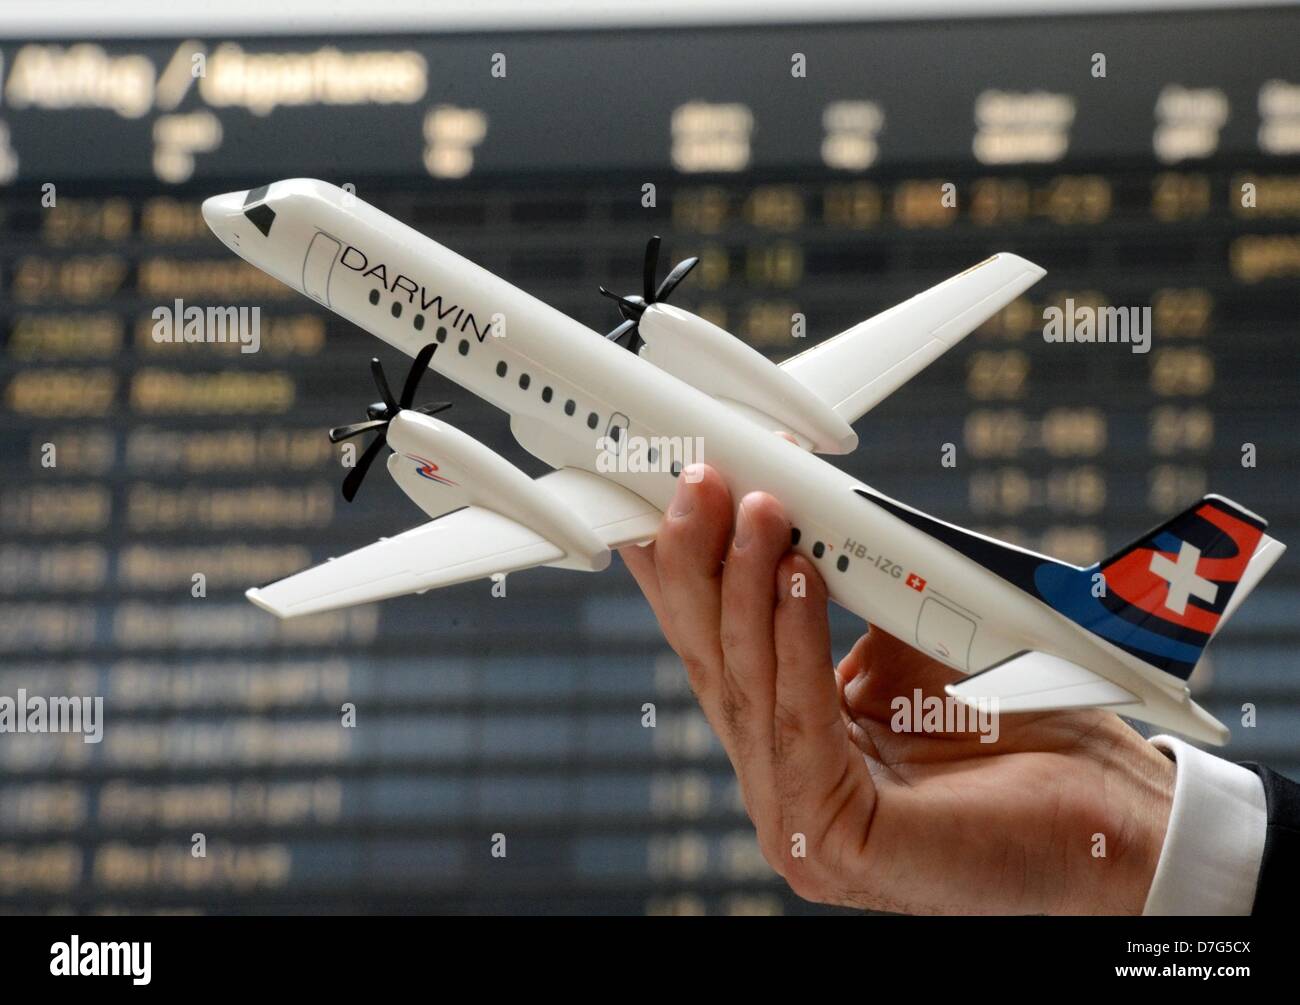 An employee of Darwin airlines based in Switzerland holds a model of a  turboprop airplane at the Leipzig/Halle Airport in Leipzig, Germany, 07 May  2013. Darwin will start flying to Paris and